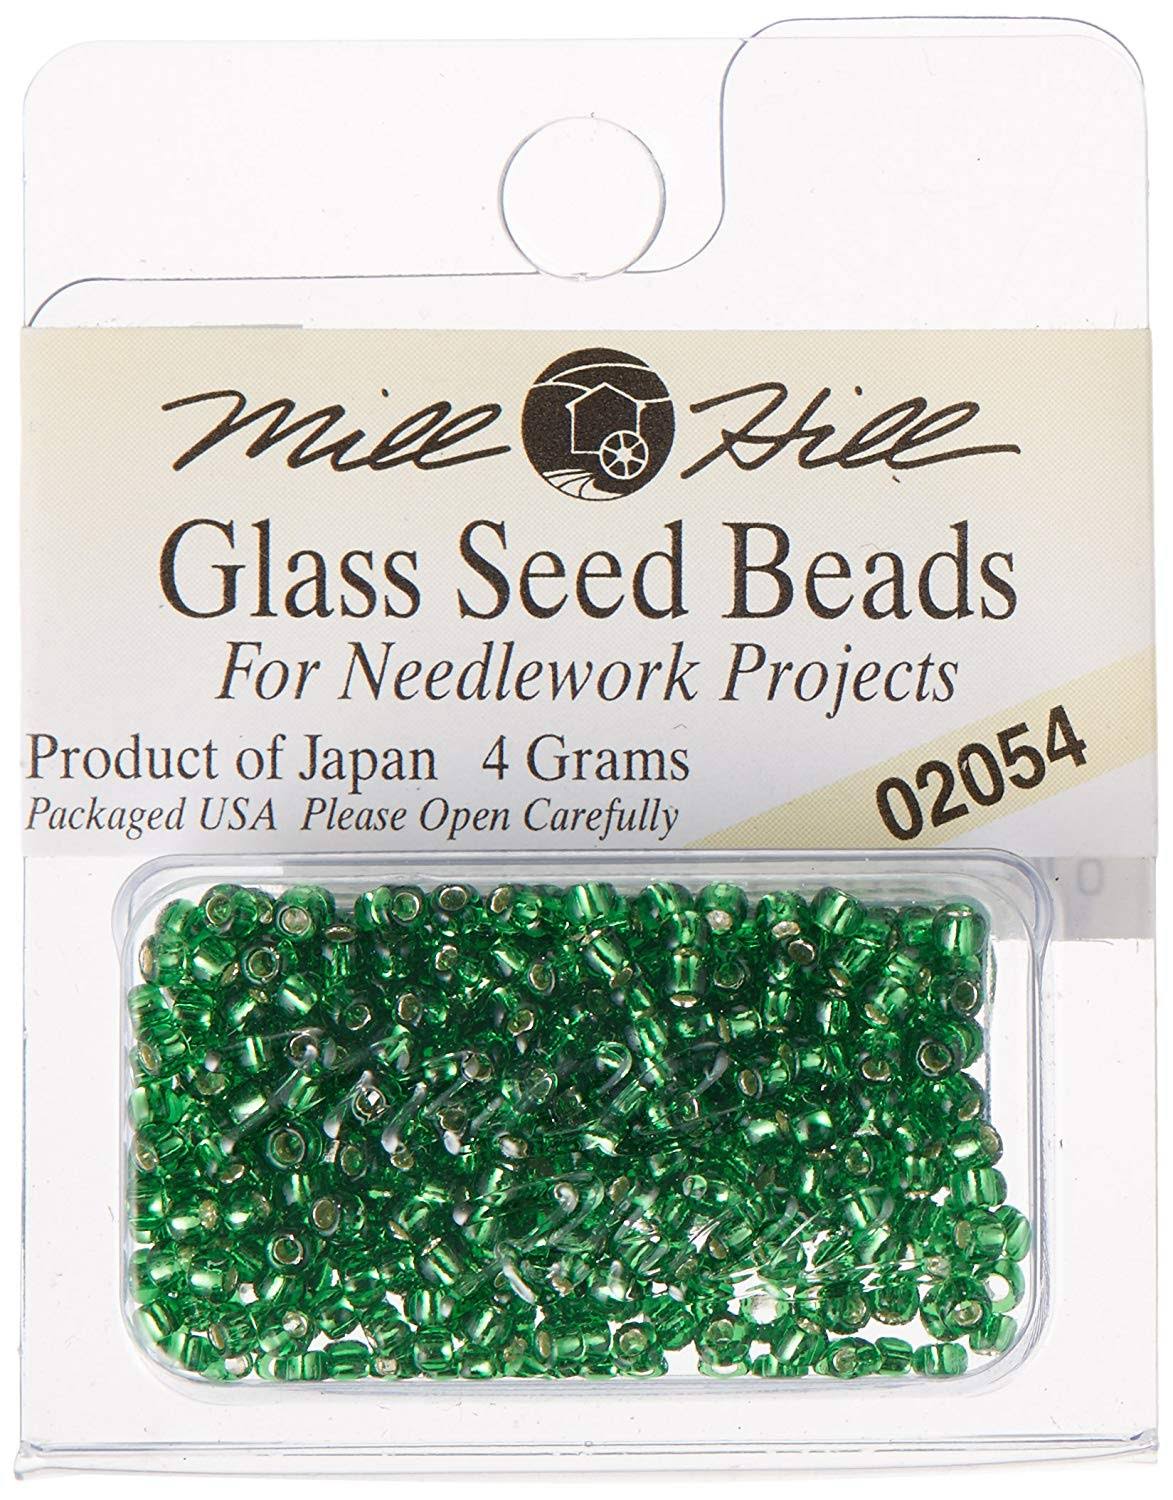 Mill Hill Glass Seed Beads 4.54g | Mill Hill | Arts & Crafts | Free Shipping On All Orders | 30 Day Money Back Guarantee | Delivery guaranteed